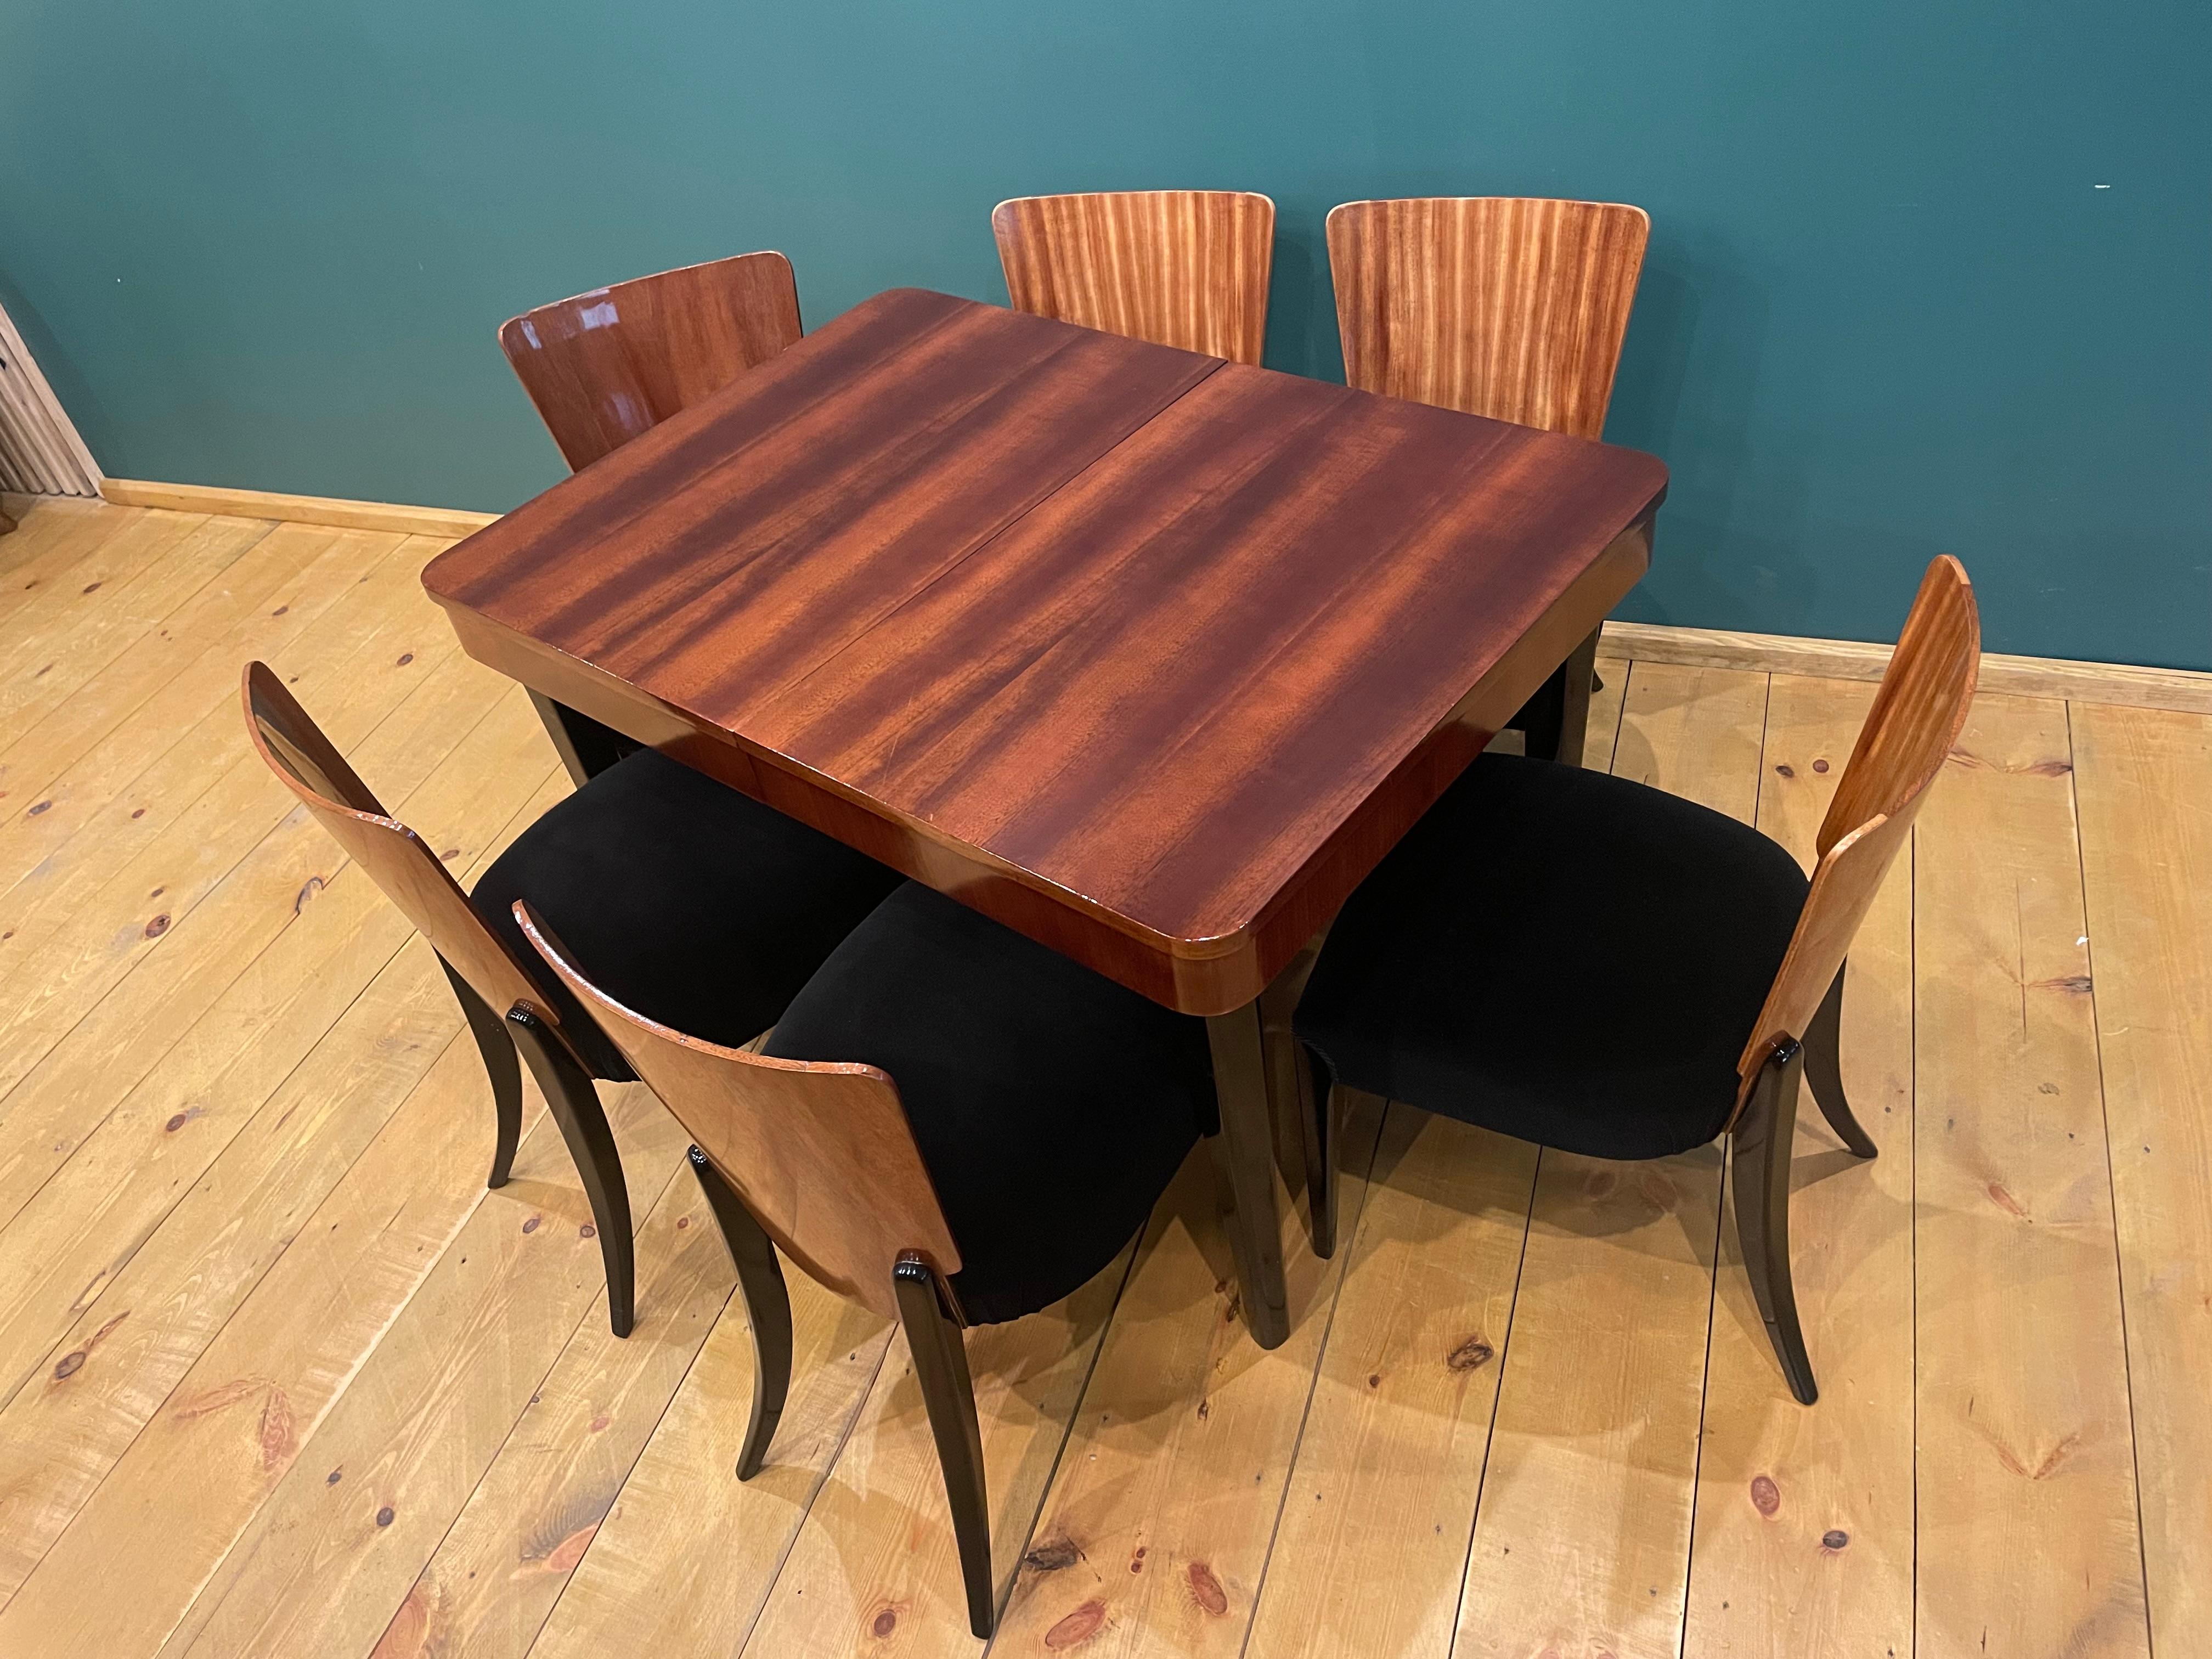 We present Art Deco dining furniture that includes a table and four chairs. A set from 1940, designed by a famous Czech designer
Jindrich Halabala, (a Czech designer ranked among the most outstanding creators of the modern period. The peak of his